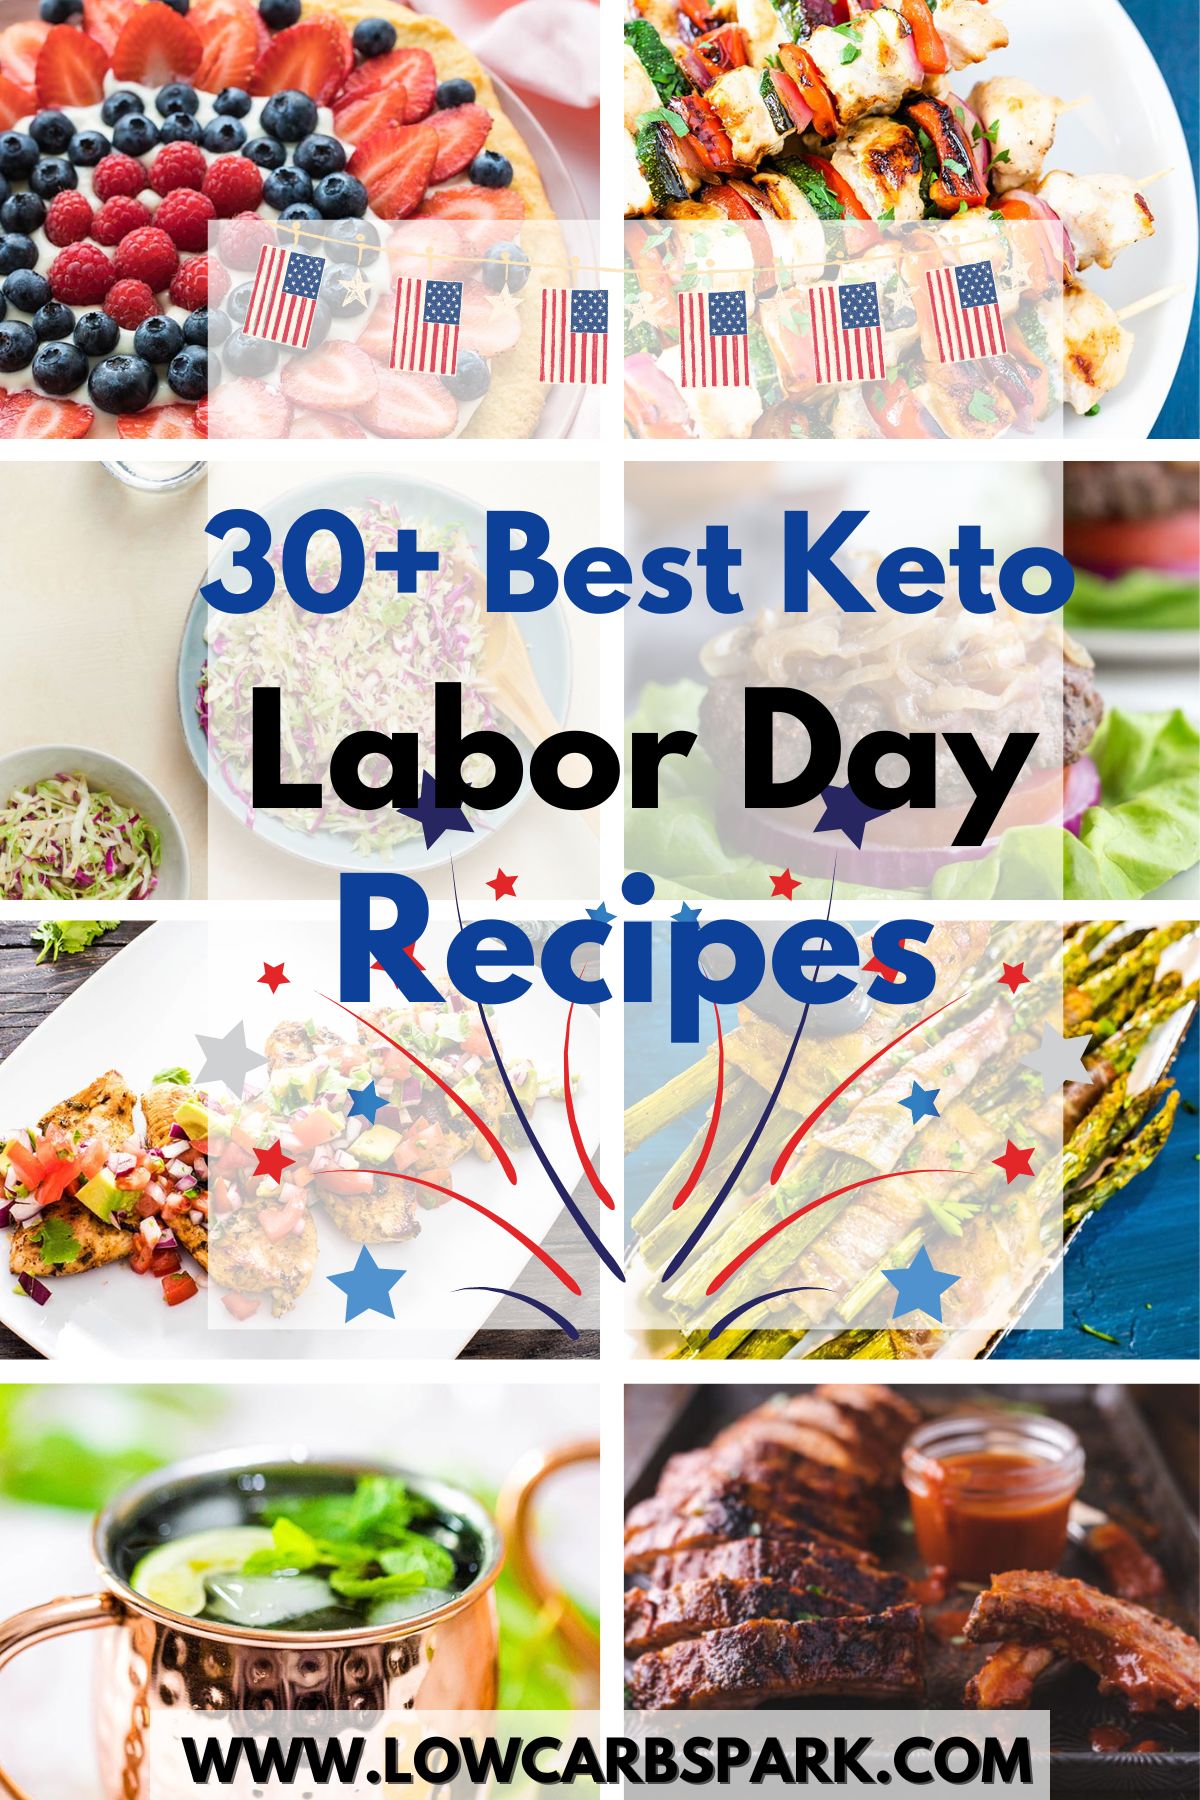 Are you looking for the most delicious recipes for Labor Day Weekend? Well, this list gathers 30 keto-friendly appetizers, low carb salads, main dishes, and desserts to help you stay on track and enjoy fantastic keto food.